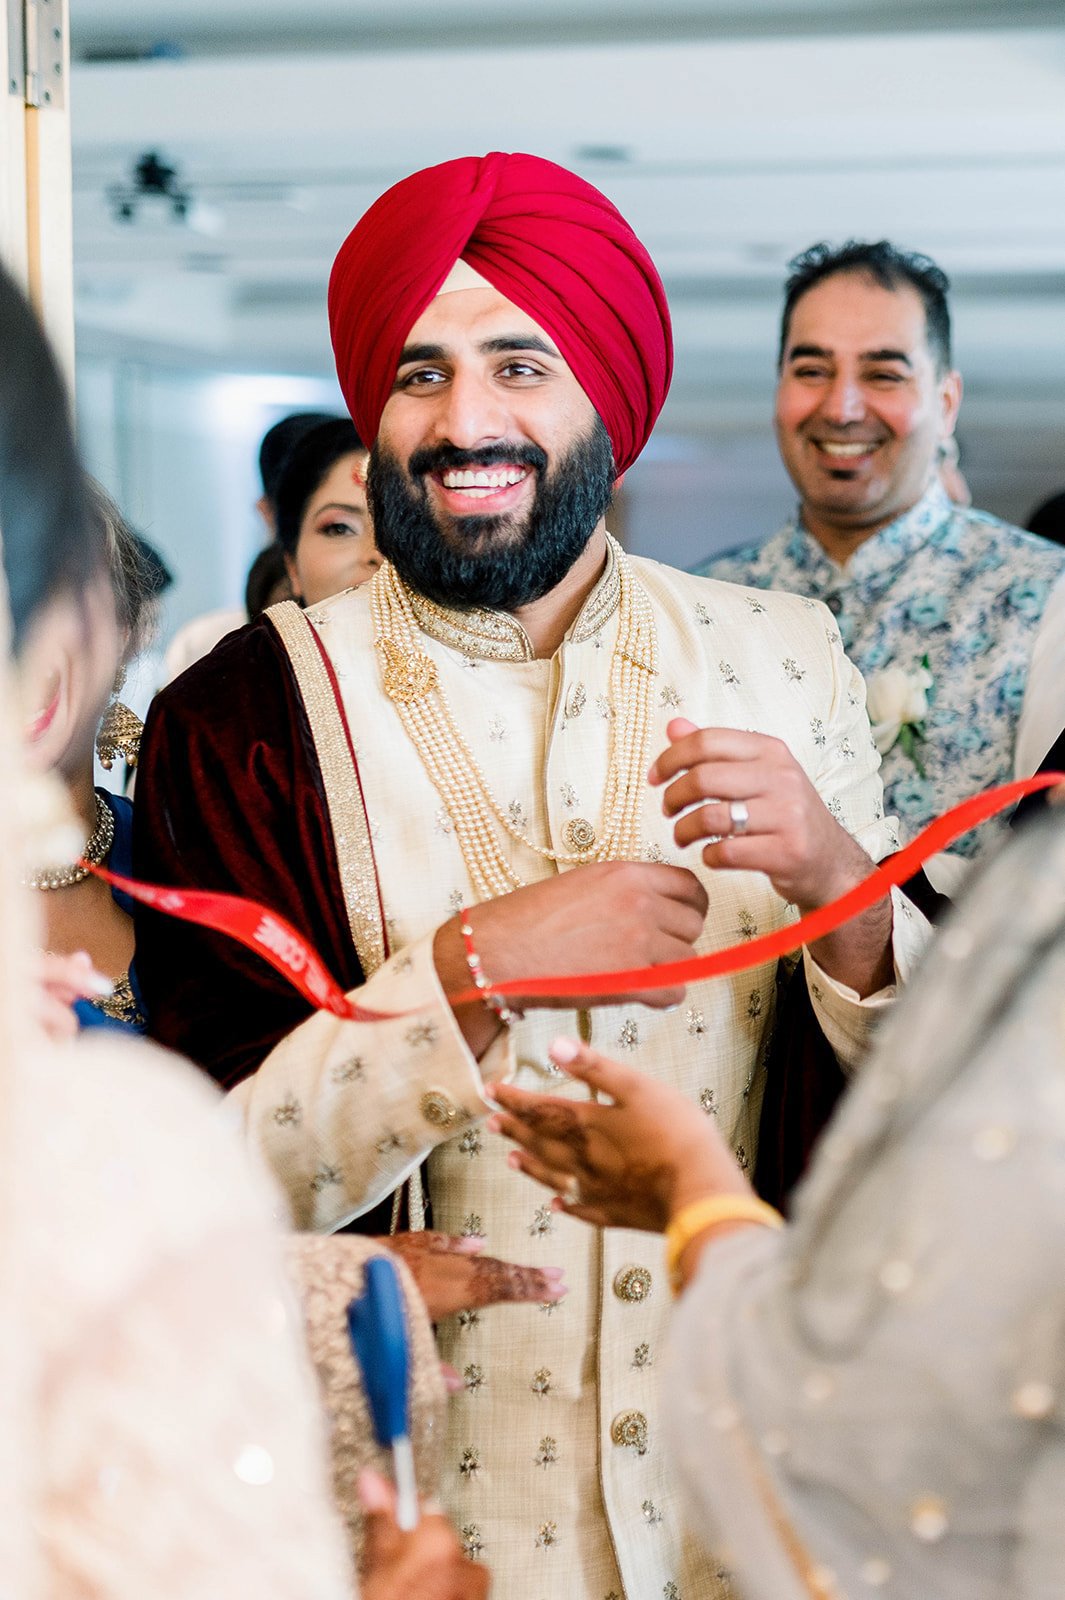 An Indian groom grins as he Bargins with the brides sisters in a doli ceremony.